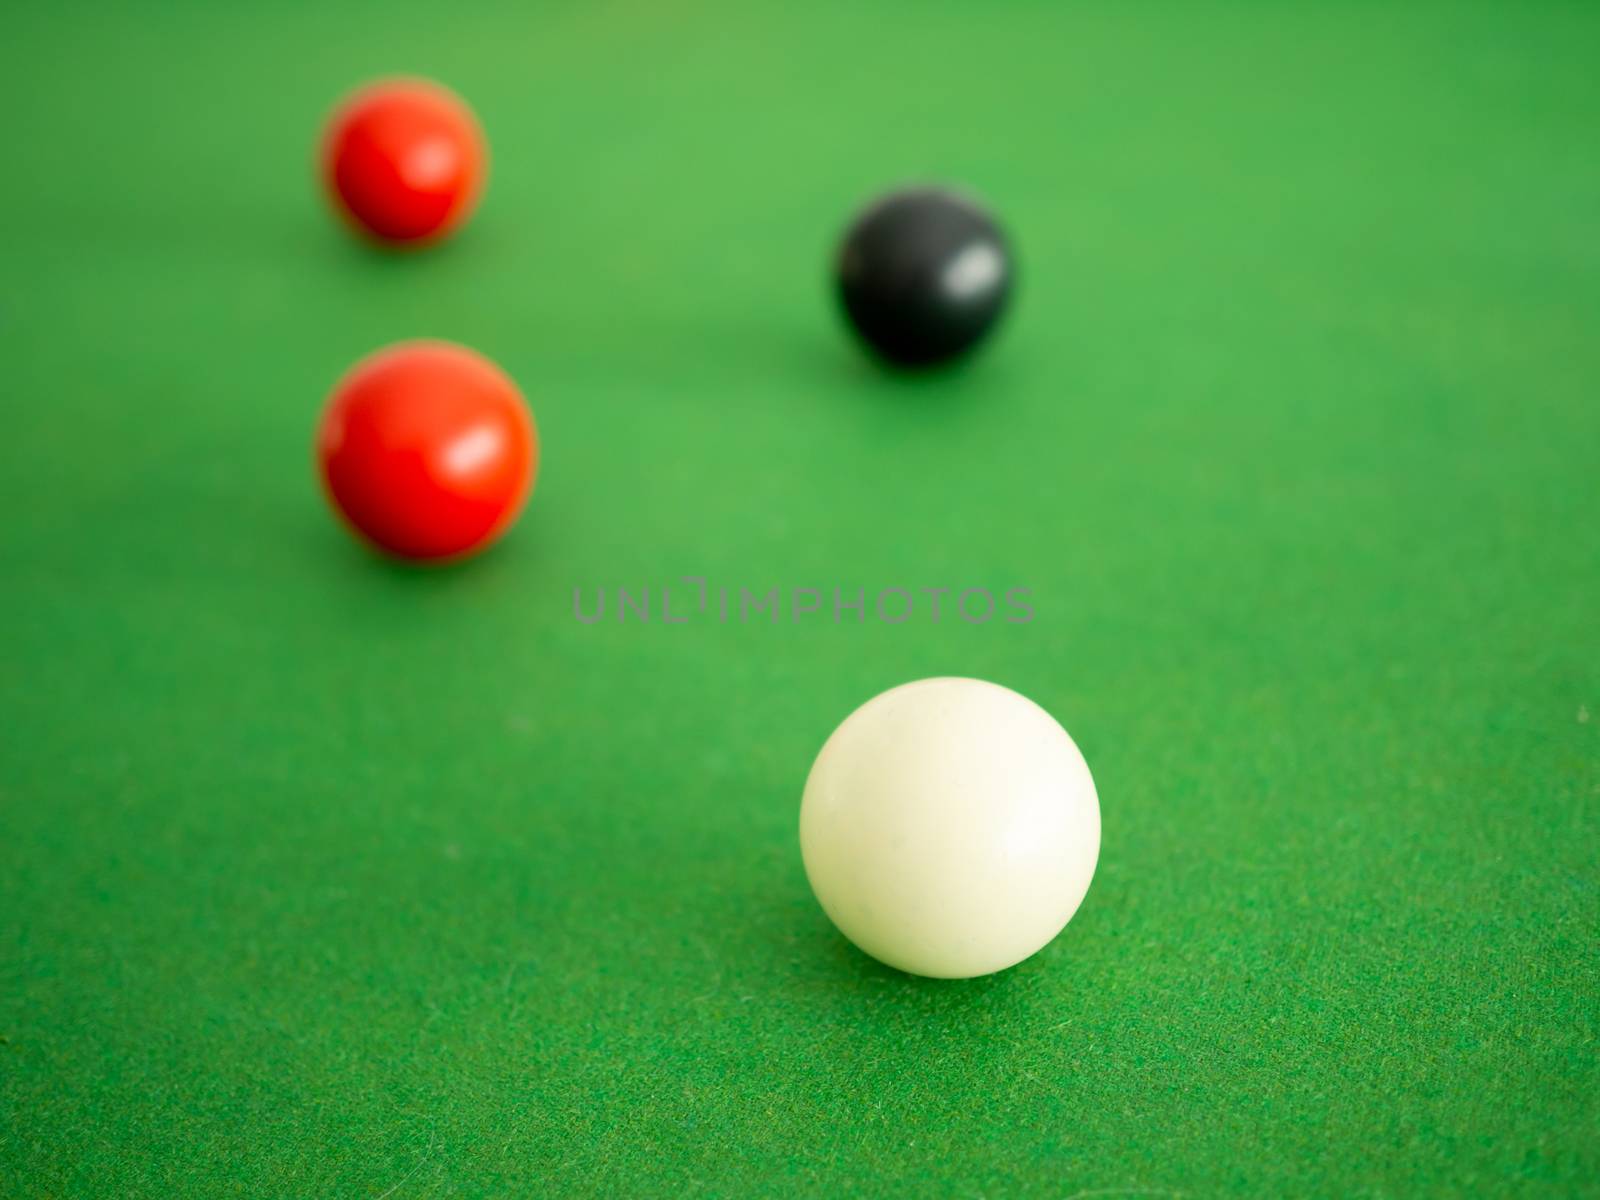 Snooker ball On the green snooker table